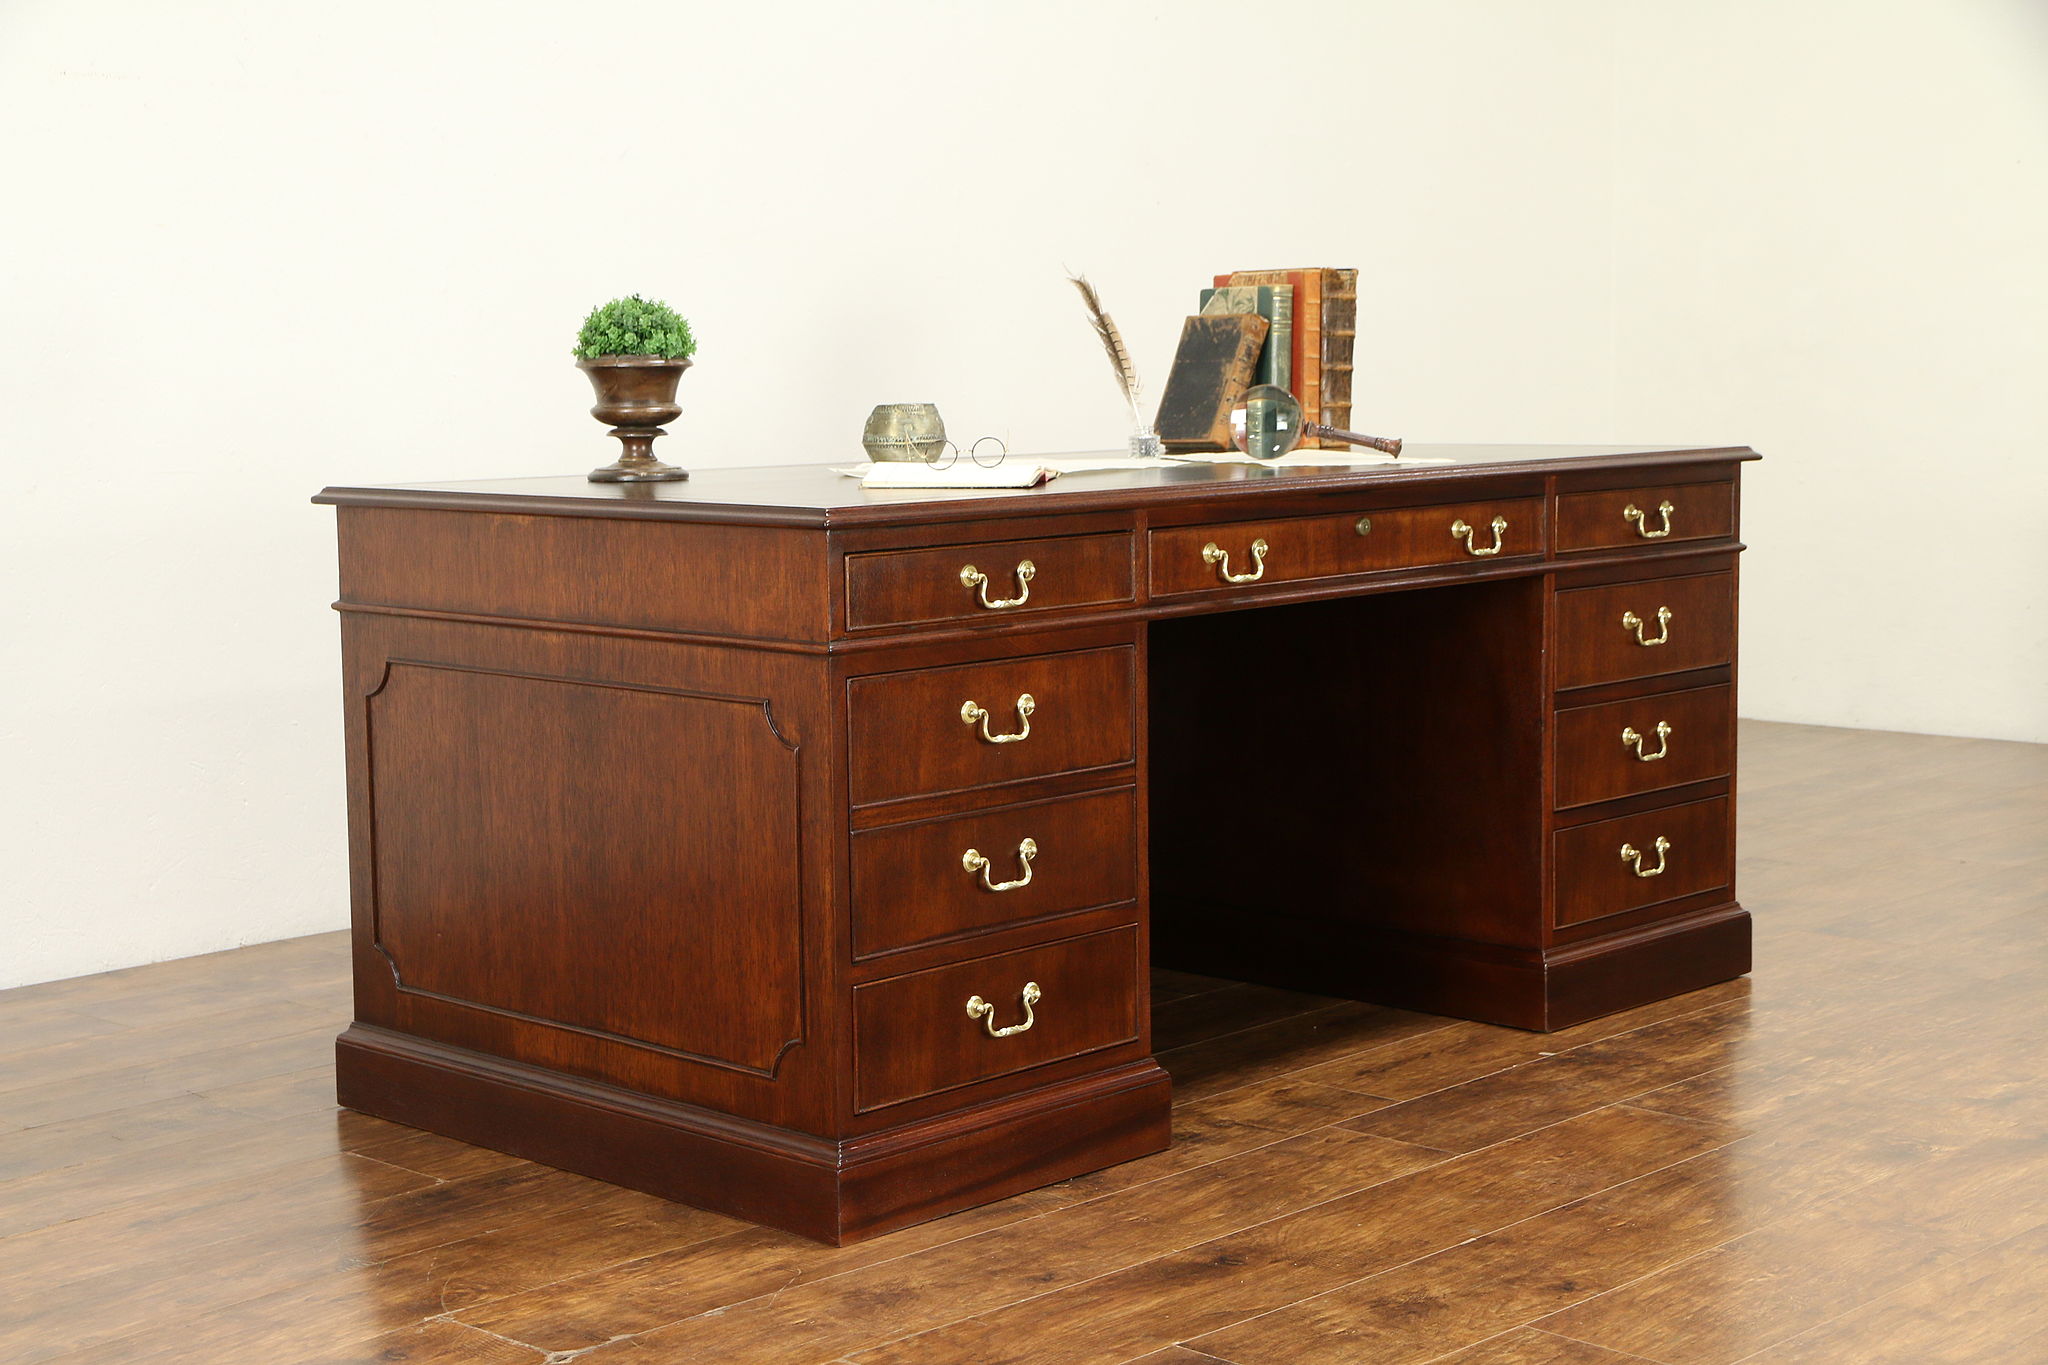 Sold Mahogany Vintage Library Or Executive Desk Leather Top